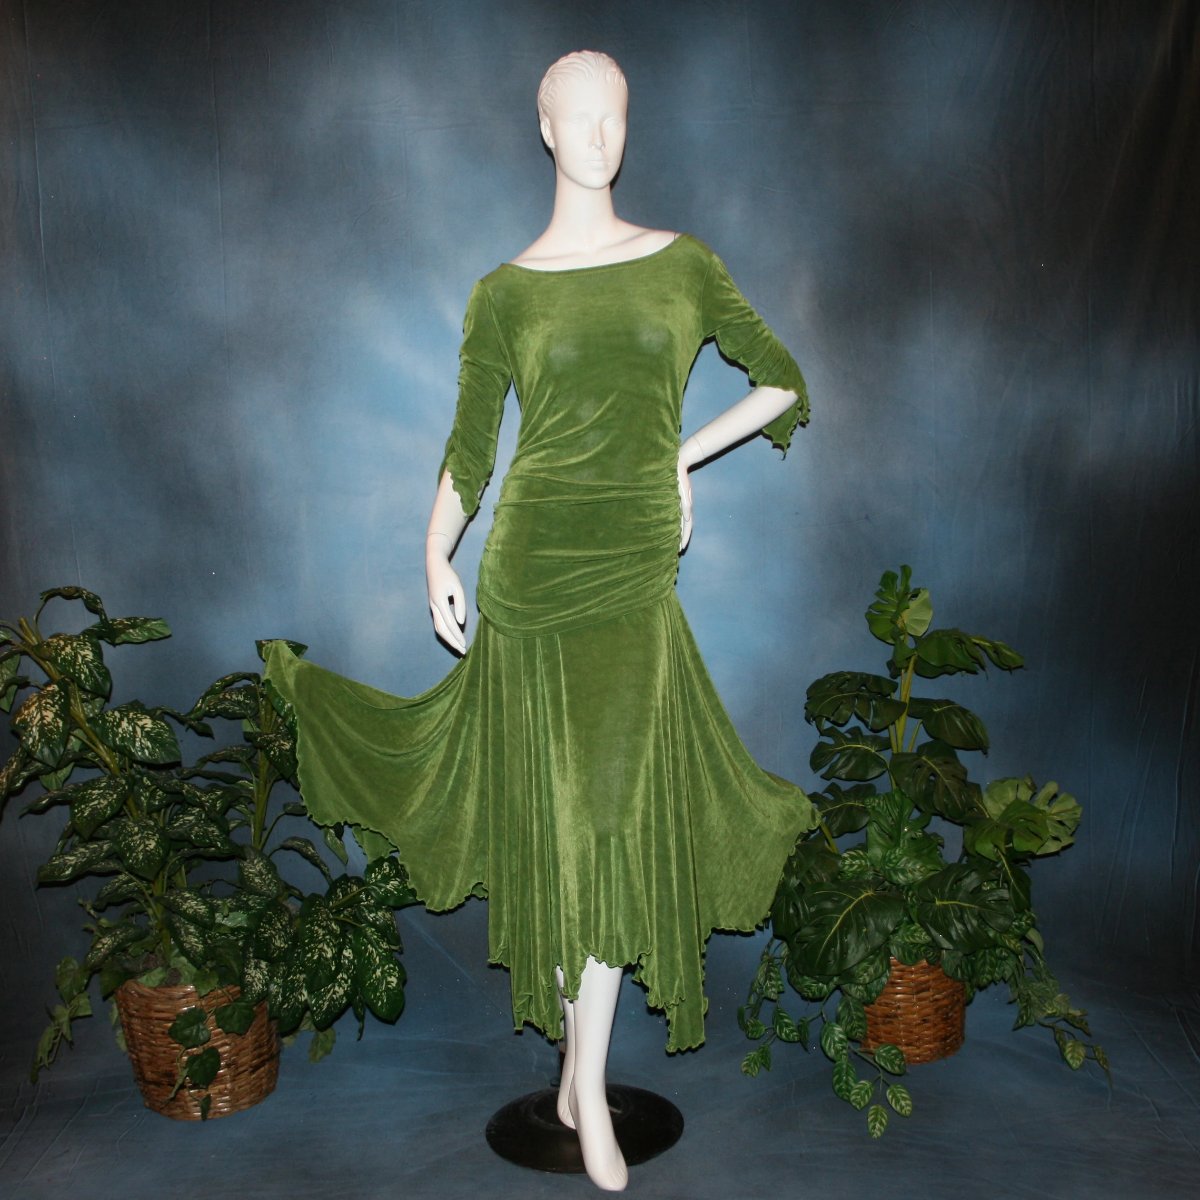 Ruched top with ruched 3/4 sleeves with a slight flaired detail includes trumpet flaired ballroom dance skirt with peaks created of luxurious olive green solid slinky fabric, & can be custom created in many colors.